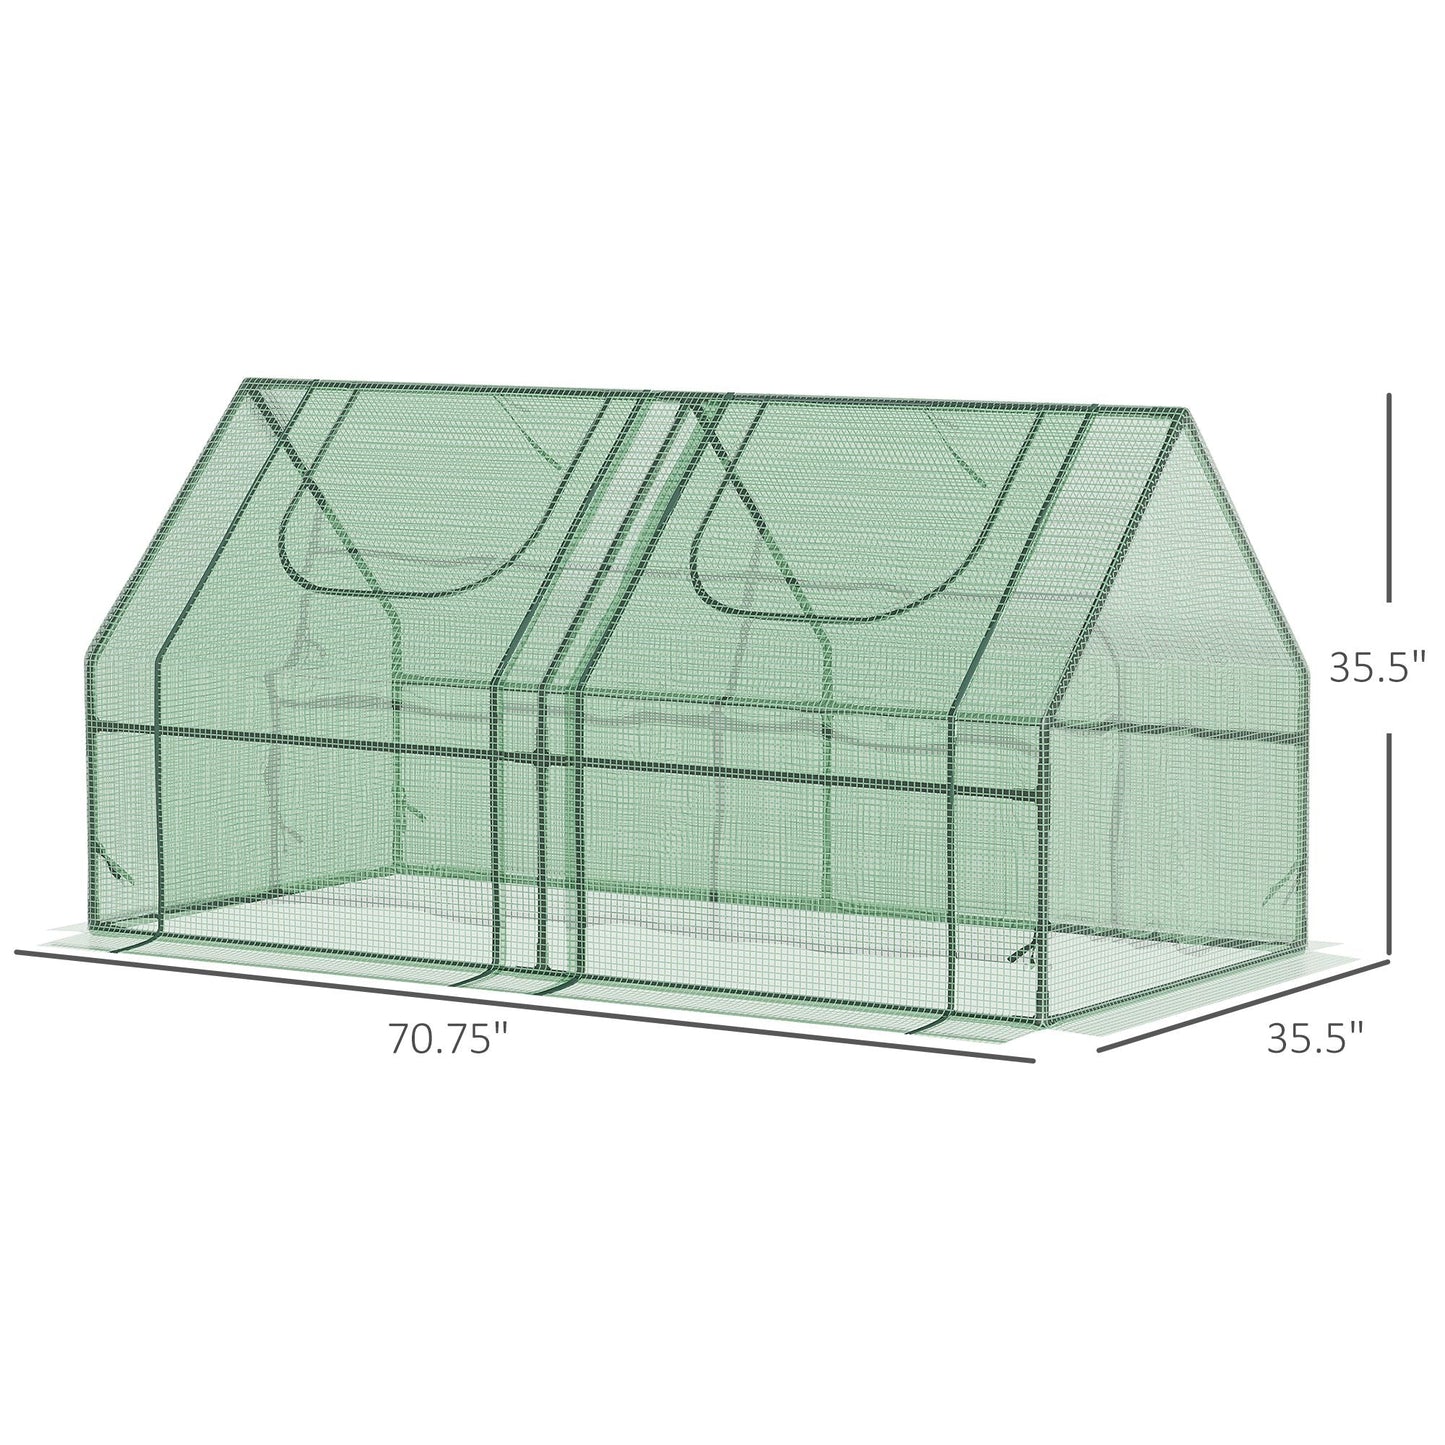 Miscellaneous-6' x 3' x 3' Portable Greenhouse, hot house for plants with 2 PE/PVC Covers, Steel Frame and 2 Roll Up Windows, Green - Outdoor Style Company